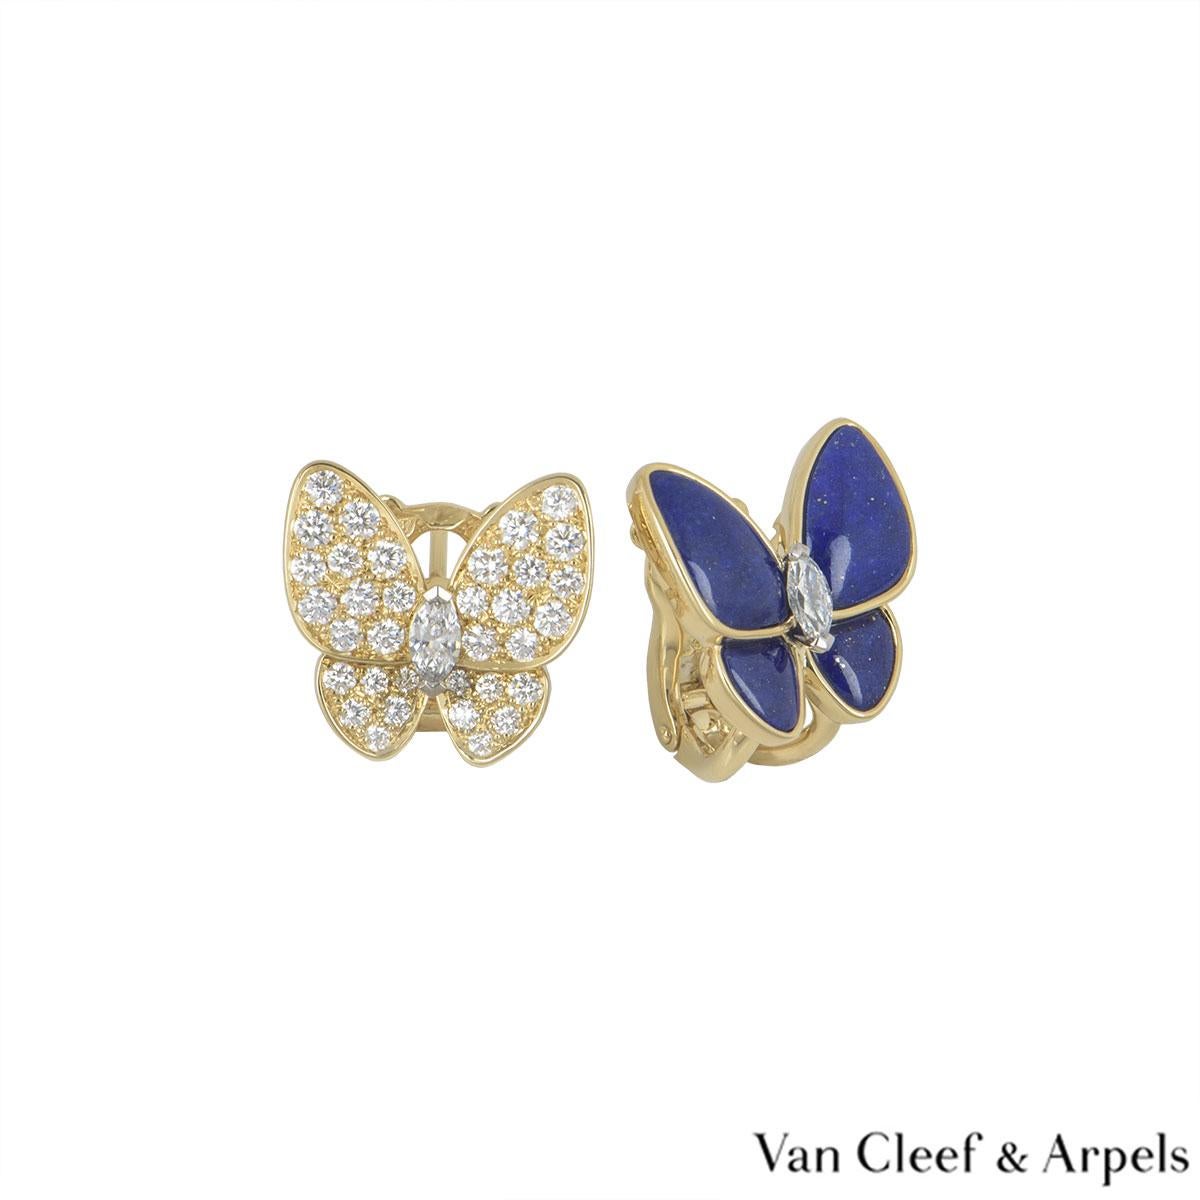 A beautiful pair of 18k yellow gold earrings from the Two Butterfly Fauna collection by Van Cleef & Arpels. One earring is set with lapis lazuli wings and the other is set with pave round brilliant cut diamond wings. Both earrings feature a single